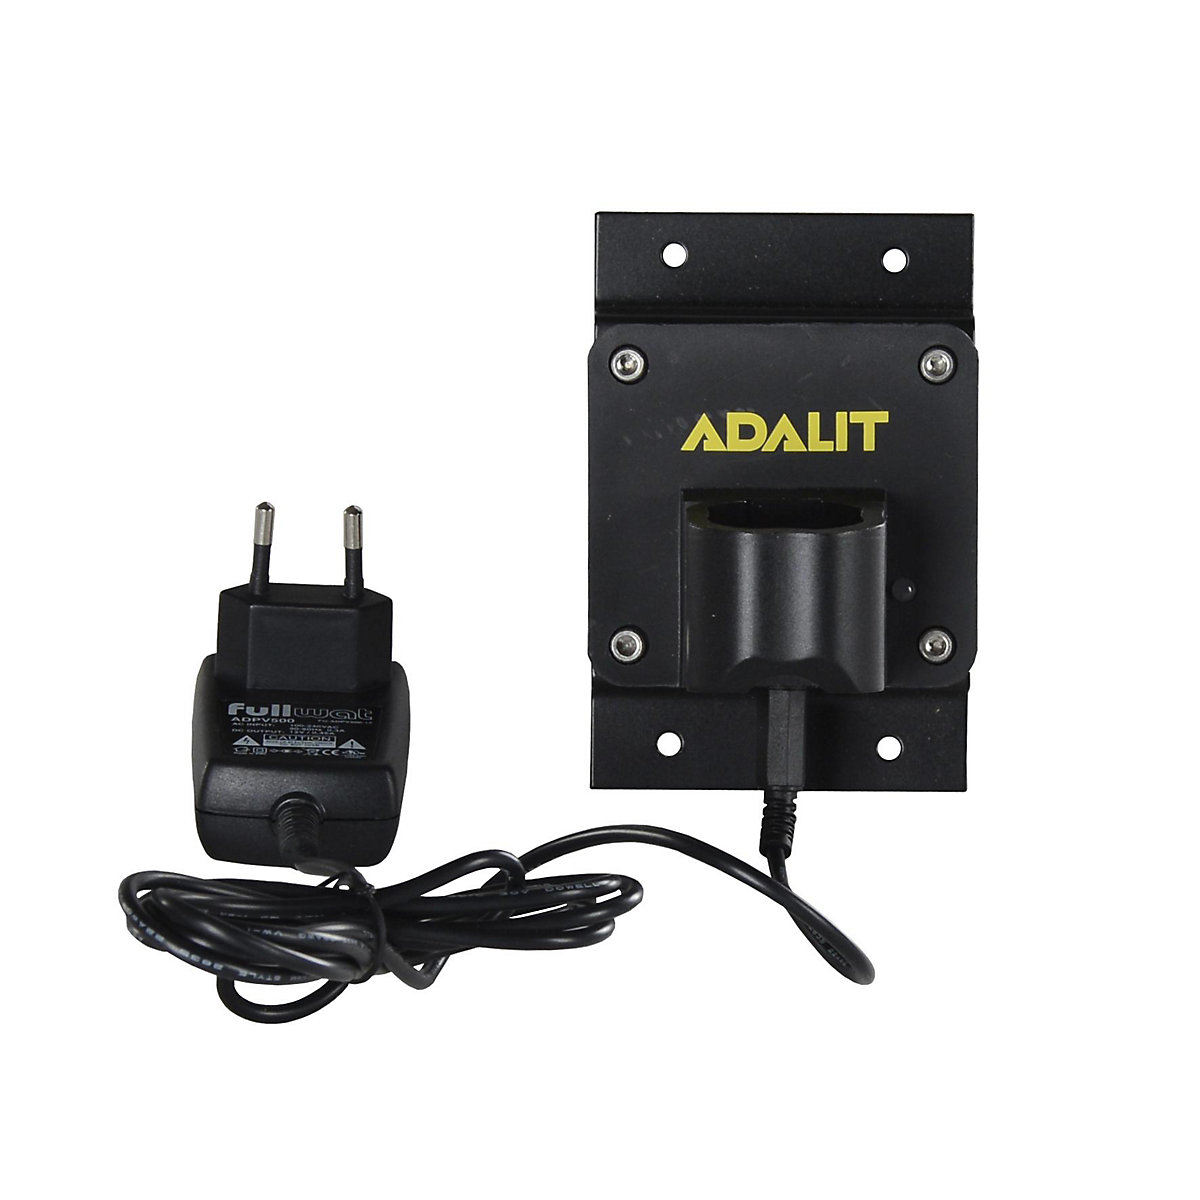 Chargeur pour lampes-torches ADALIT®